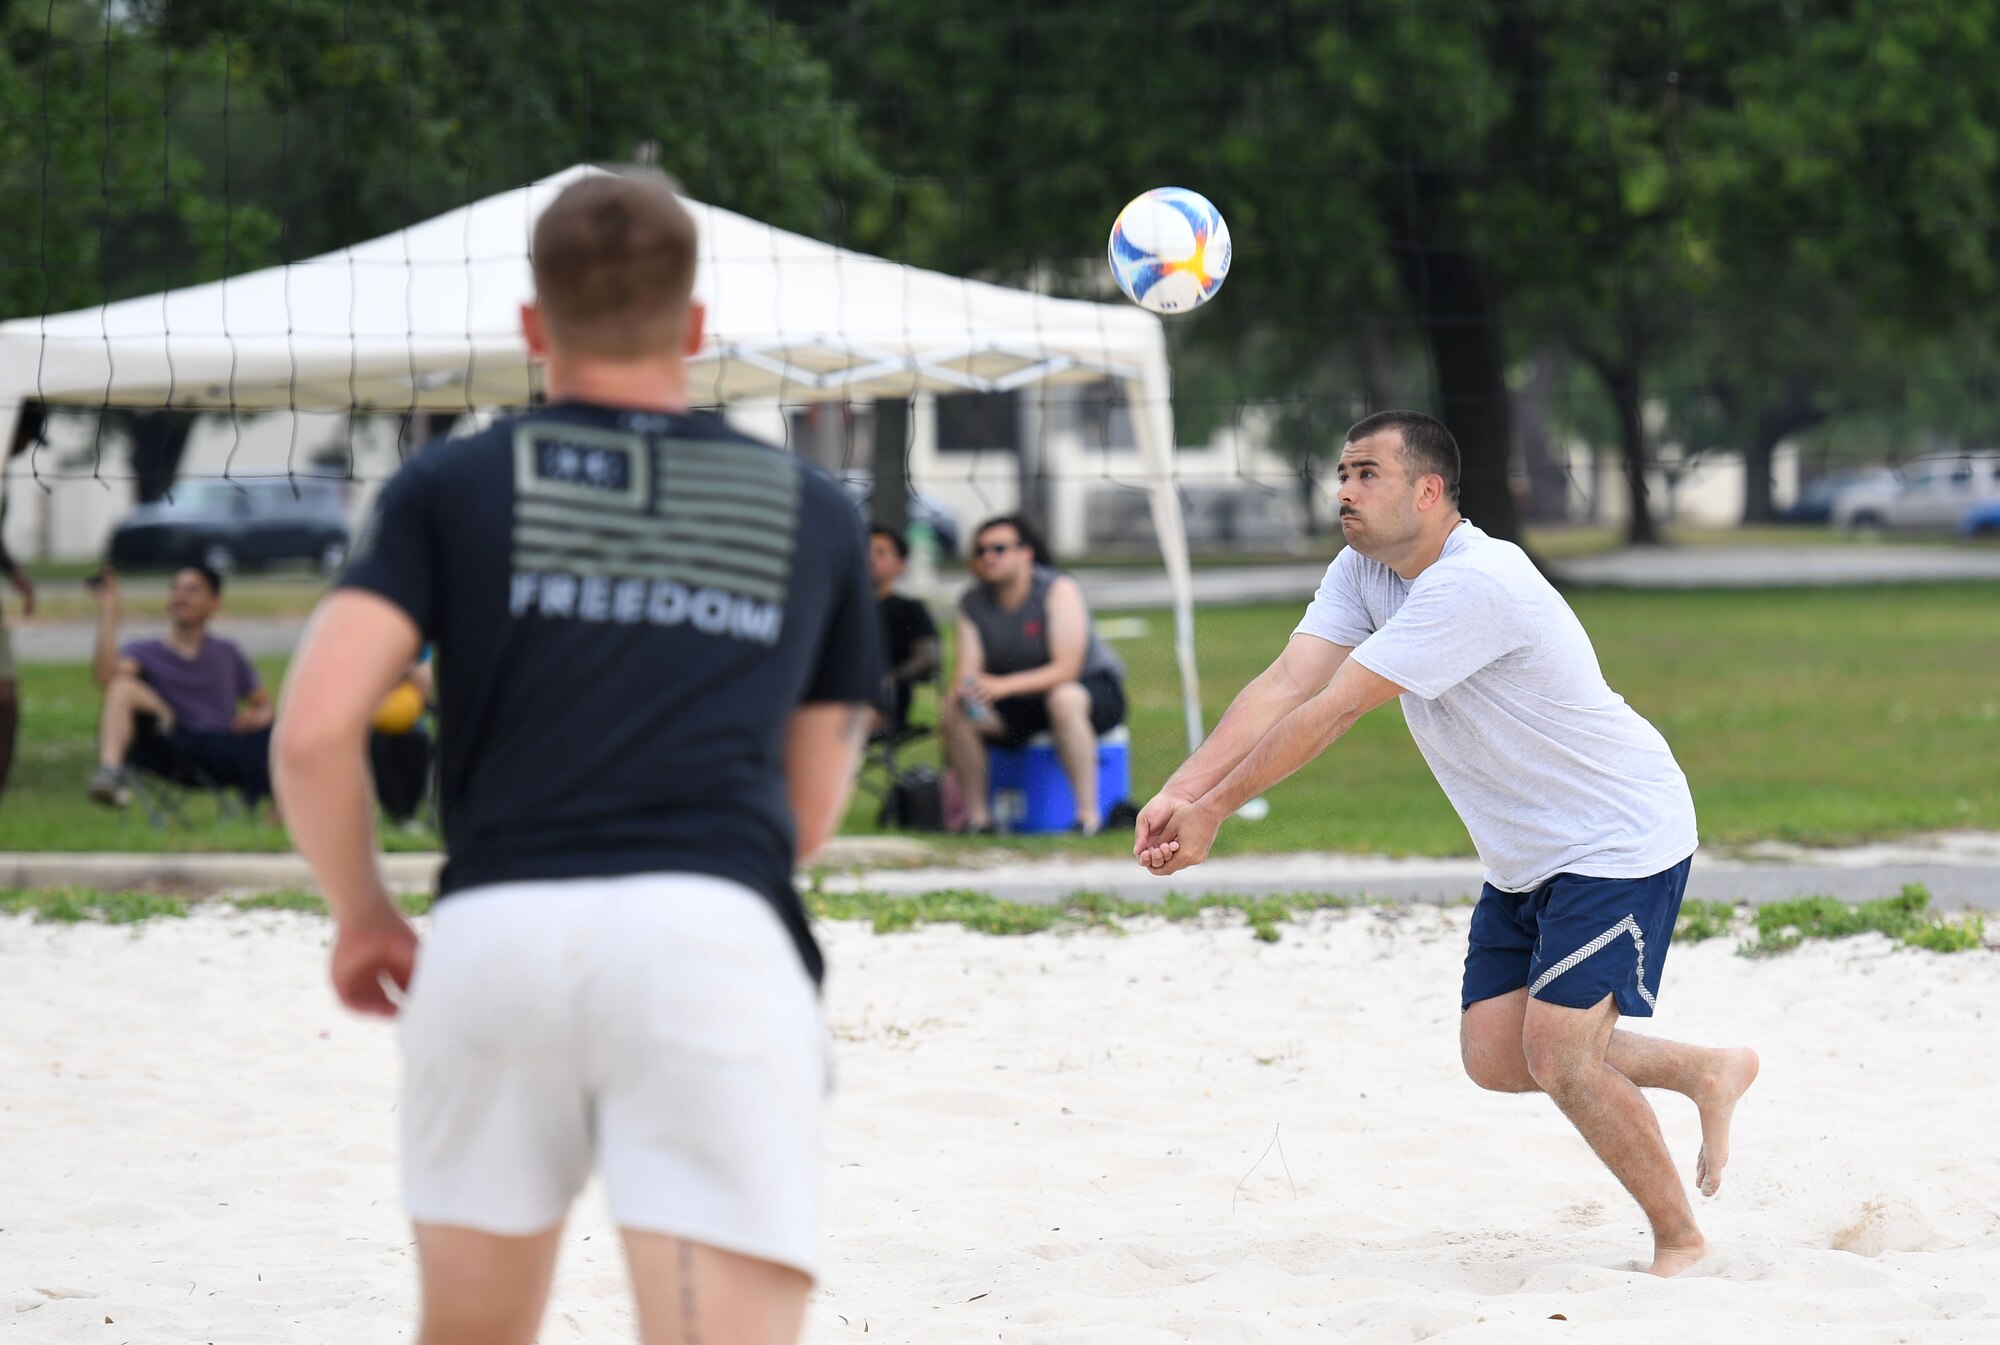 U.S. Air Force Airman 1st Class Vacchio Enzo, 338th Training Squadron student, hits a volleyball during the Sexual Assault and Awareness Prevention Month volleyball tournament at Keesler Air Force Base, Mississippi, April 29, 2022. More than 20 teams competed in the event, which was held in acknowledgment of Sexual Assault and Awareness Prevention Month throughout April. (U.S. Air Force photo by Kemberly Groue)